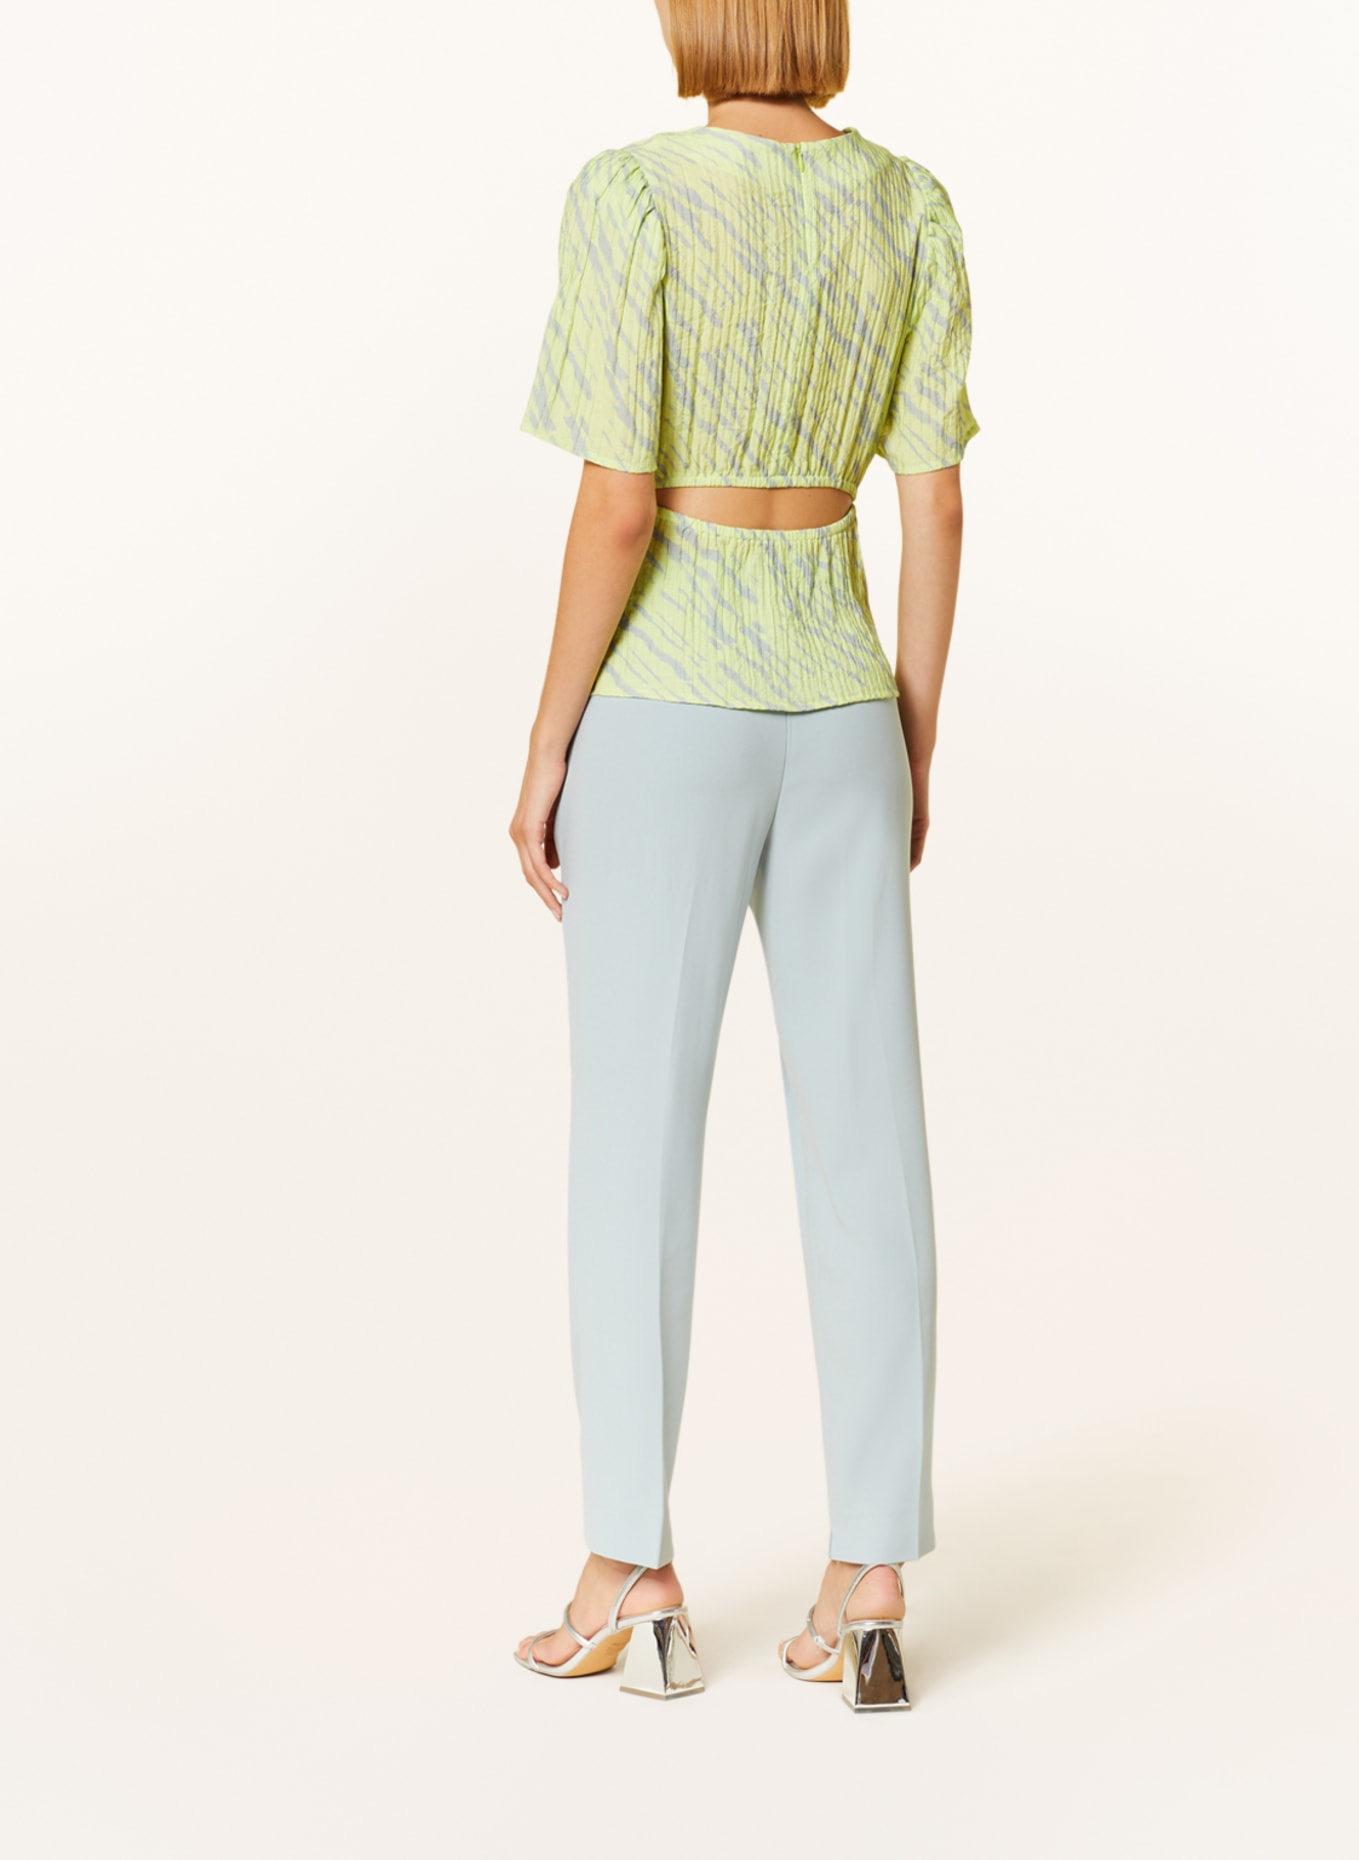 BEAUMONT Shirt blouse ISLA with cut-out, Color: LIGHT GREEN/ BLUE GRAY (Image 3)